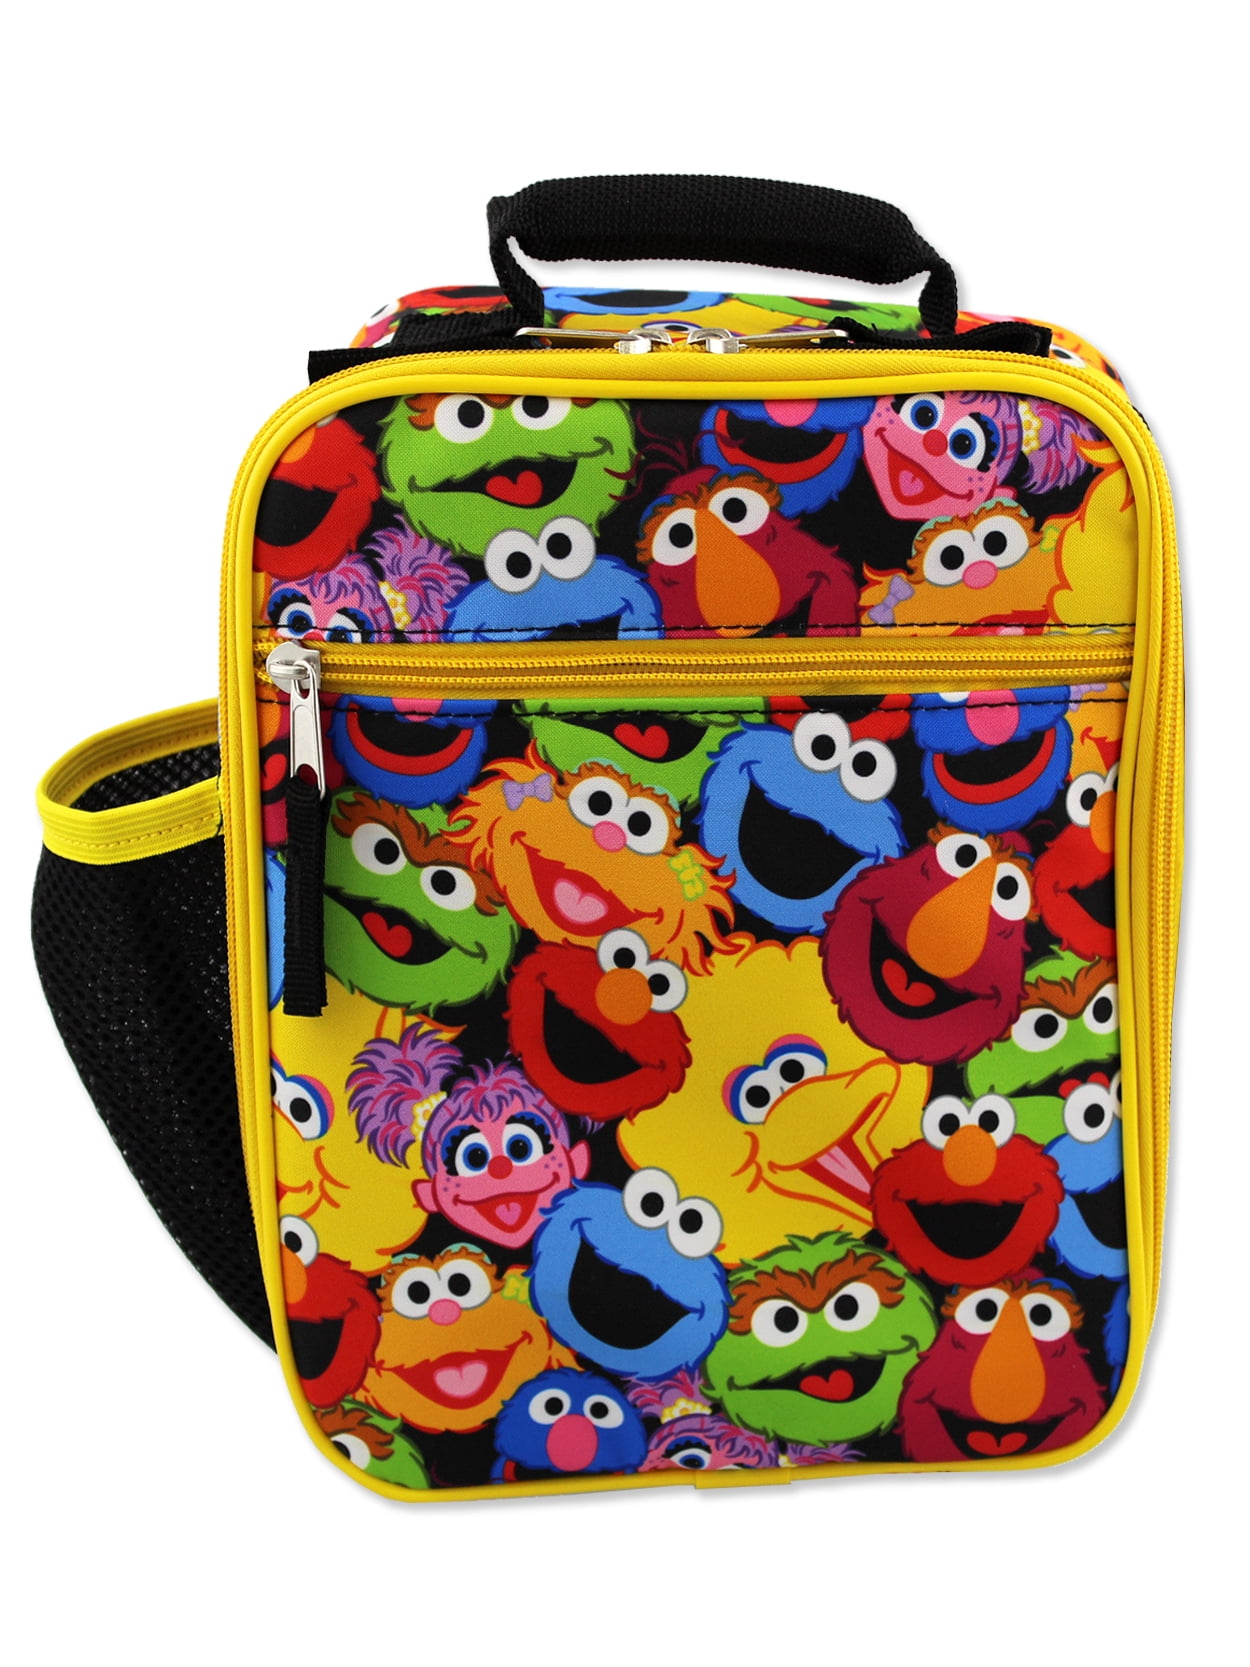 Jeexi Kids Lunch Box, Back to School Insulated Soft Bag Mini